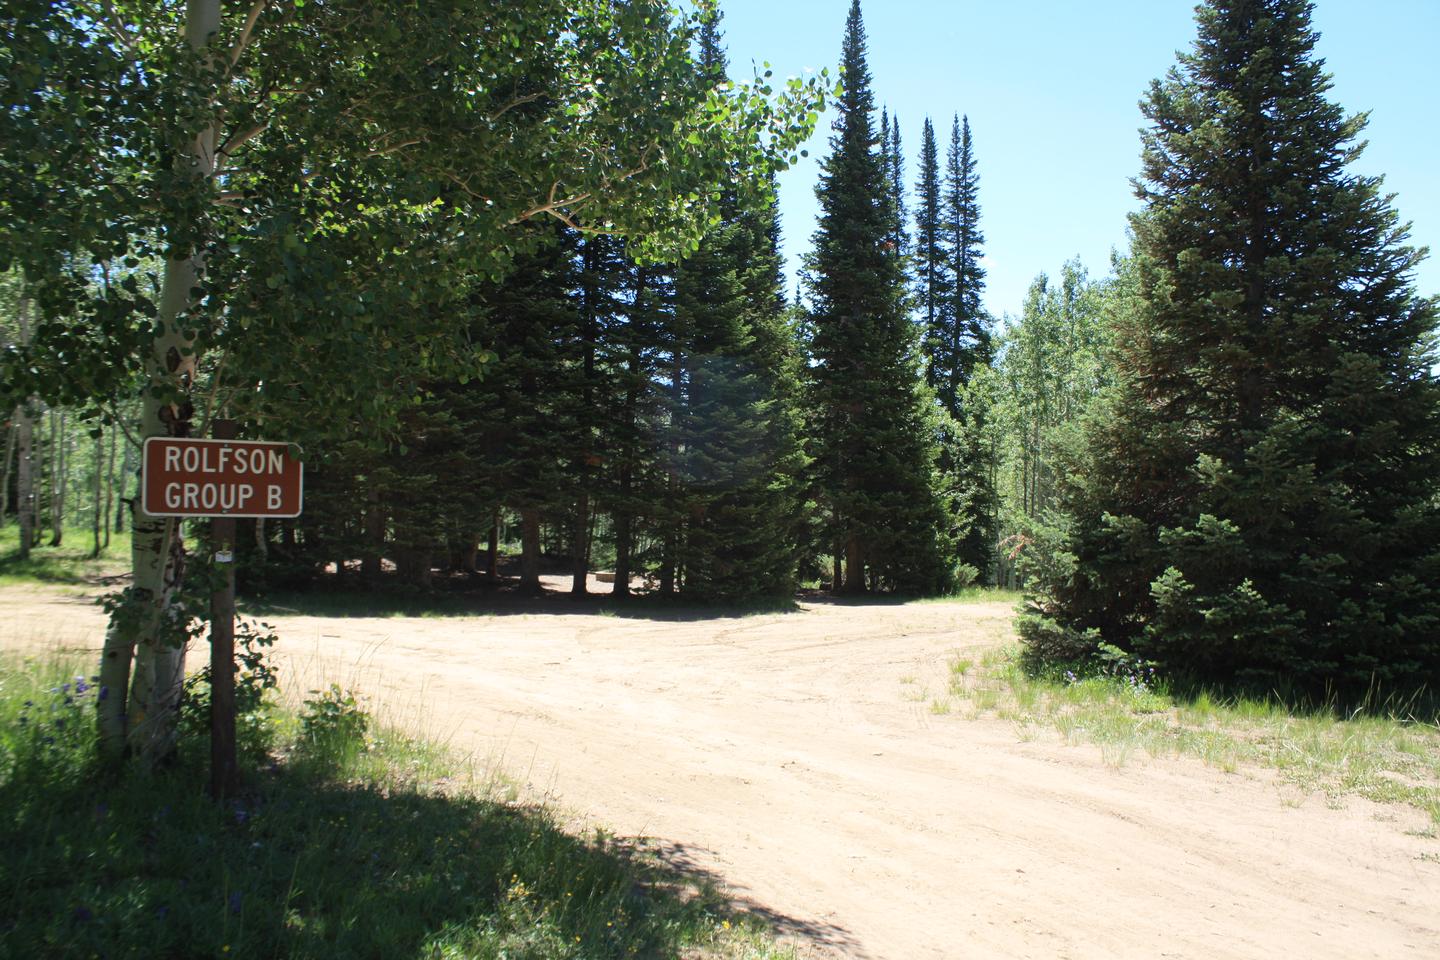 Lake Canyon Campground  -Rolfson Group Site BLake Canyon Campground -  Rolfson Group Site B